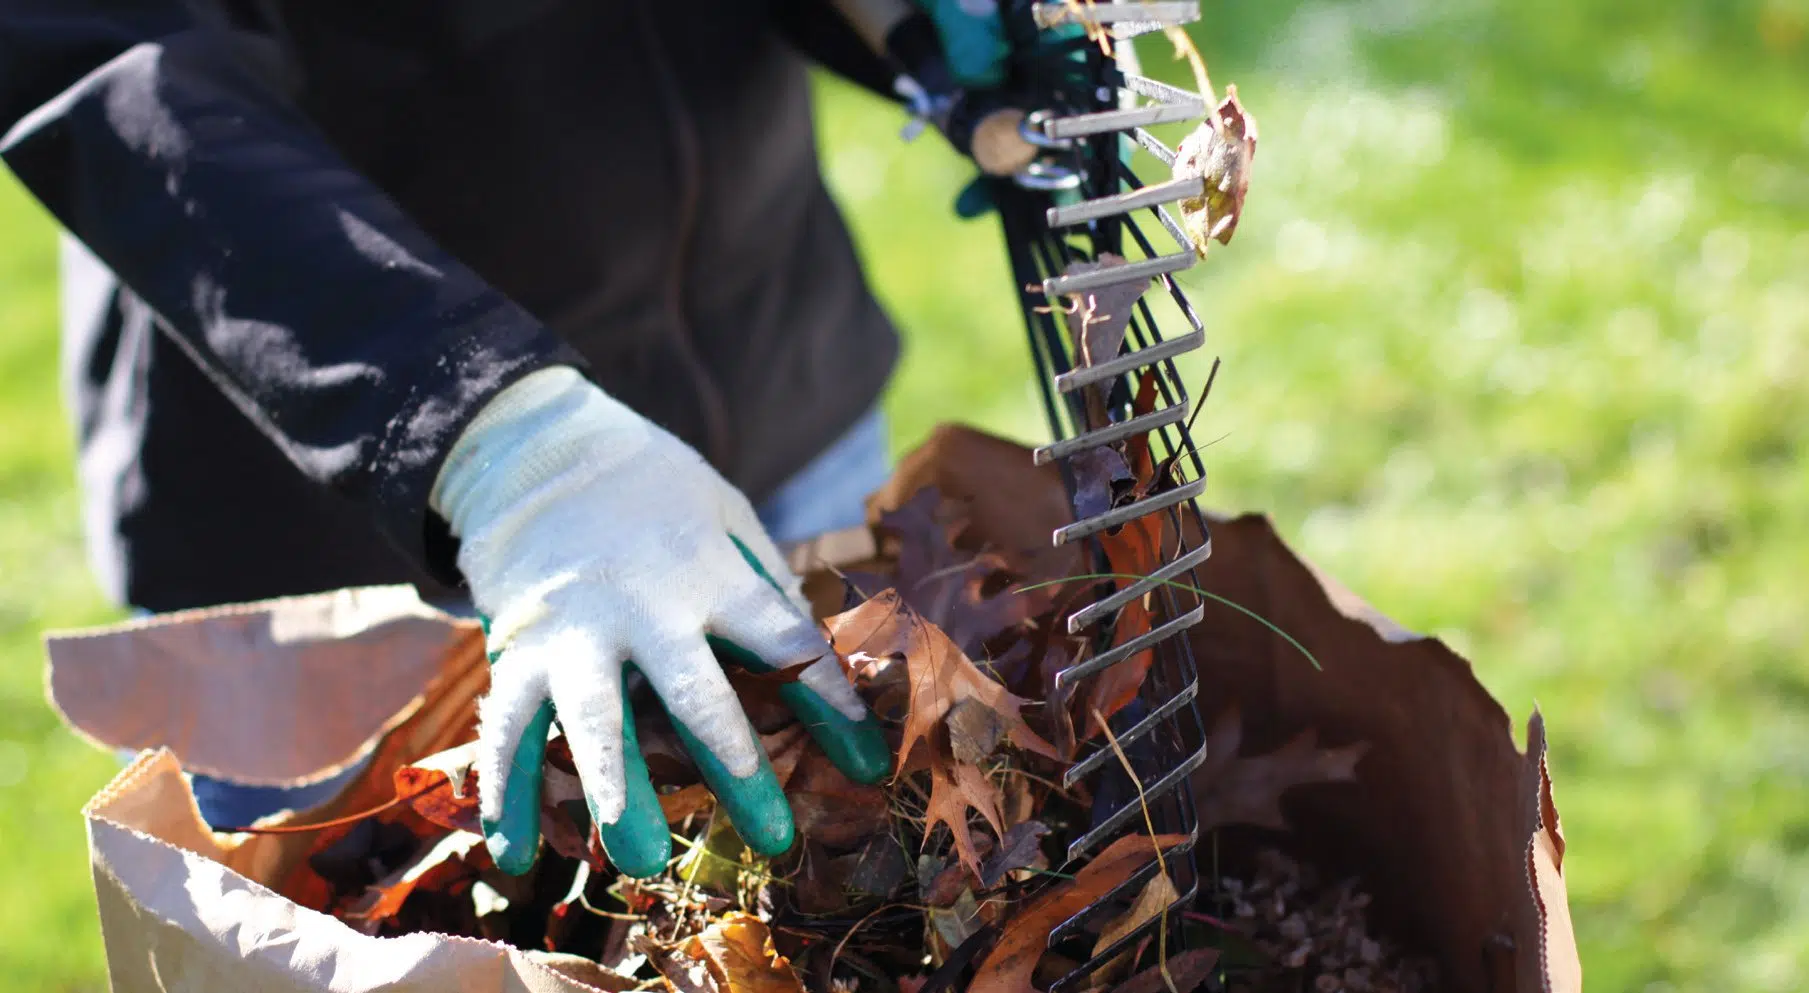 Curbside Leaf and Yard Waste Collection Continues This Weekend in Wellington County